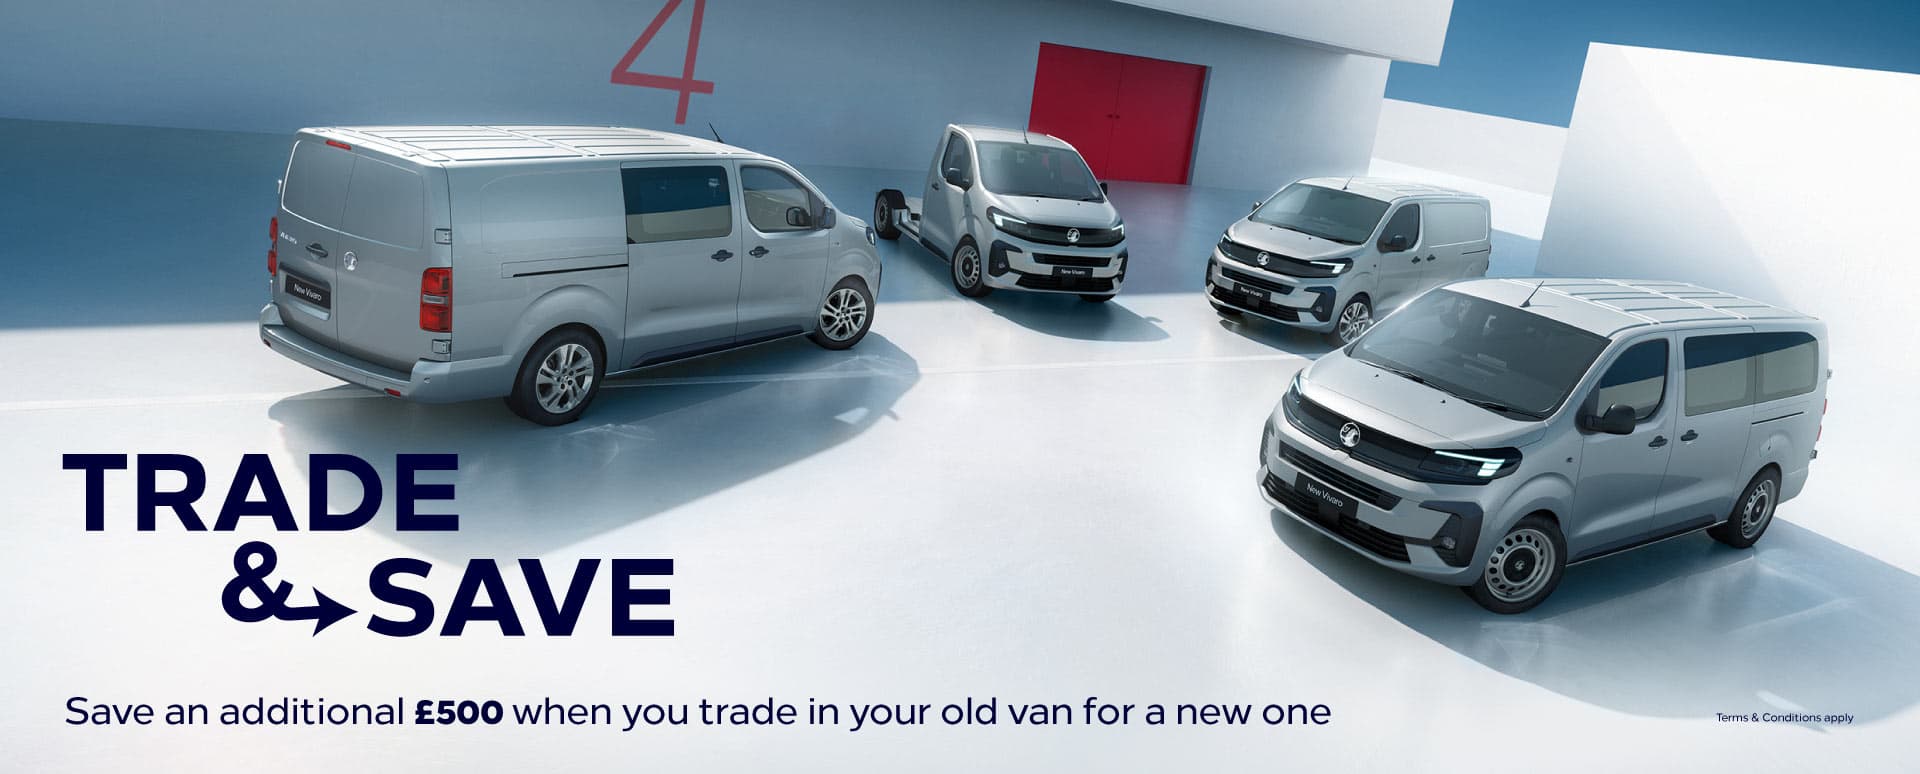 Vauxhall Commercial Vehicle Trade & Save Sale Event